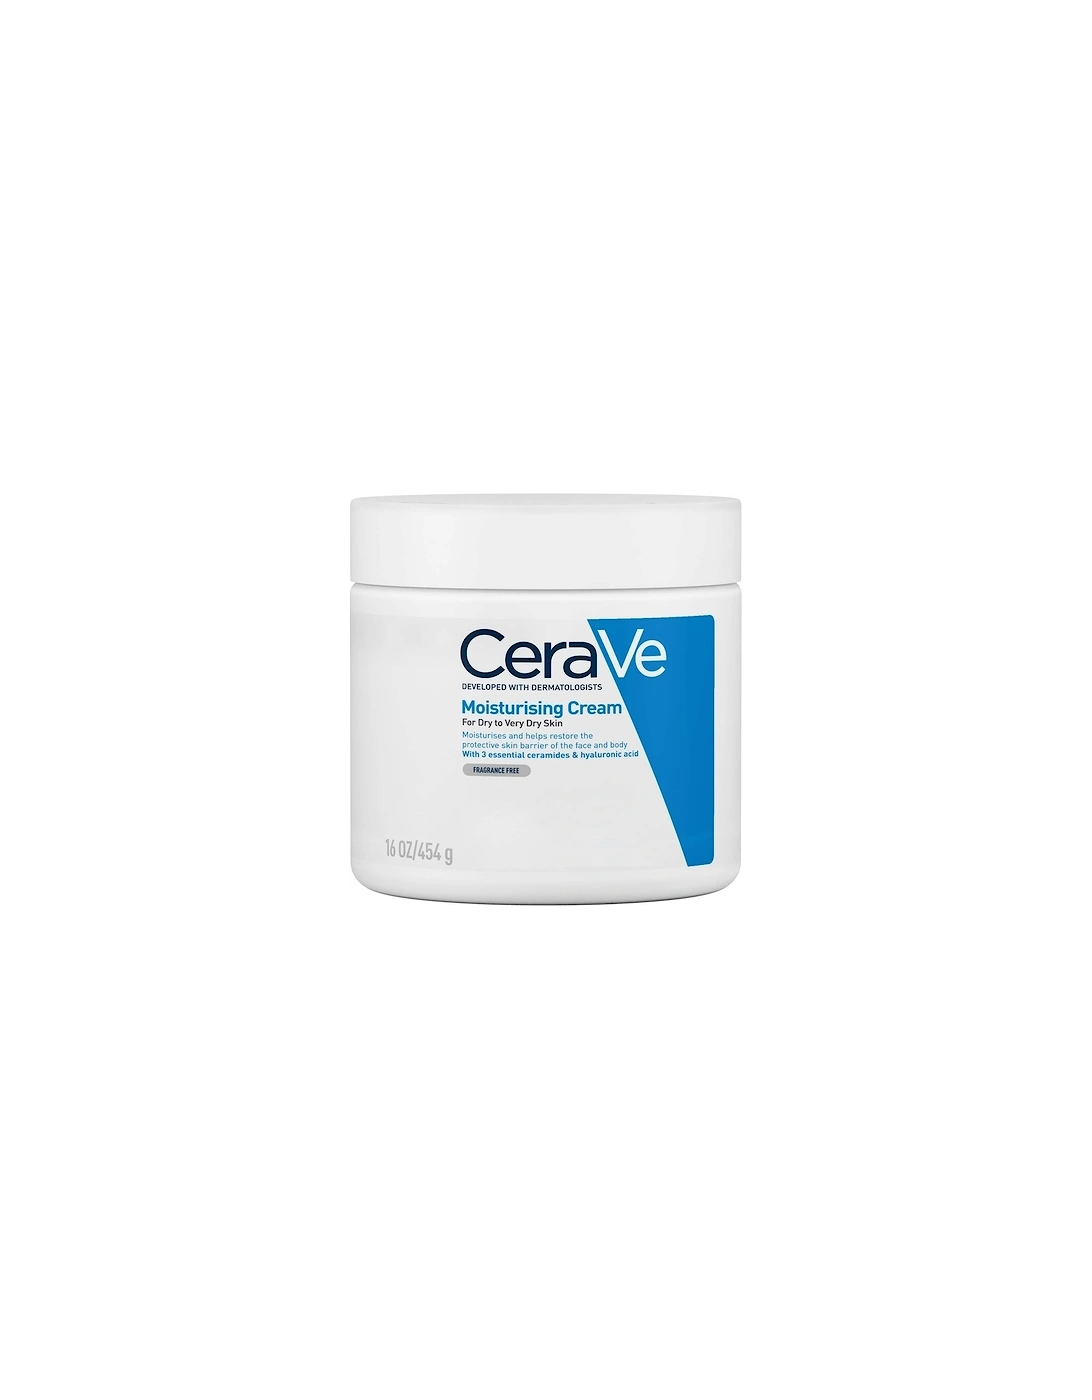 Moisturising Cream Pot with Ceramides for Dry to Very Dry Skin 454g - CeraVe, 2 of 1